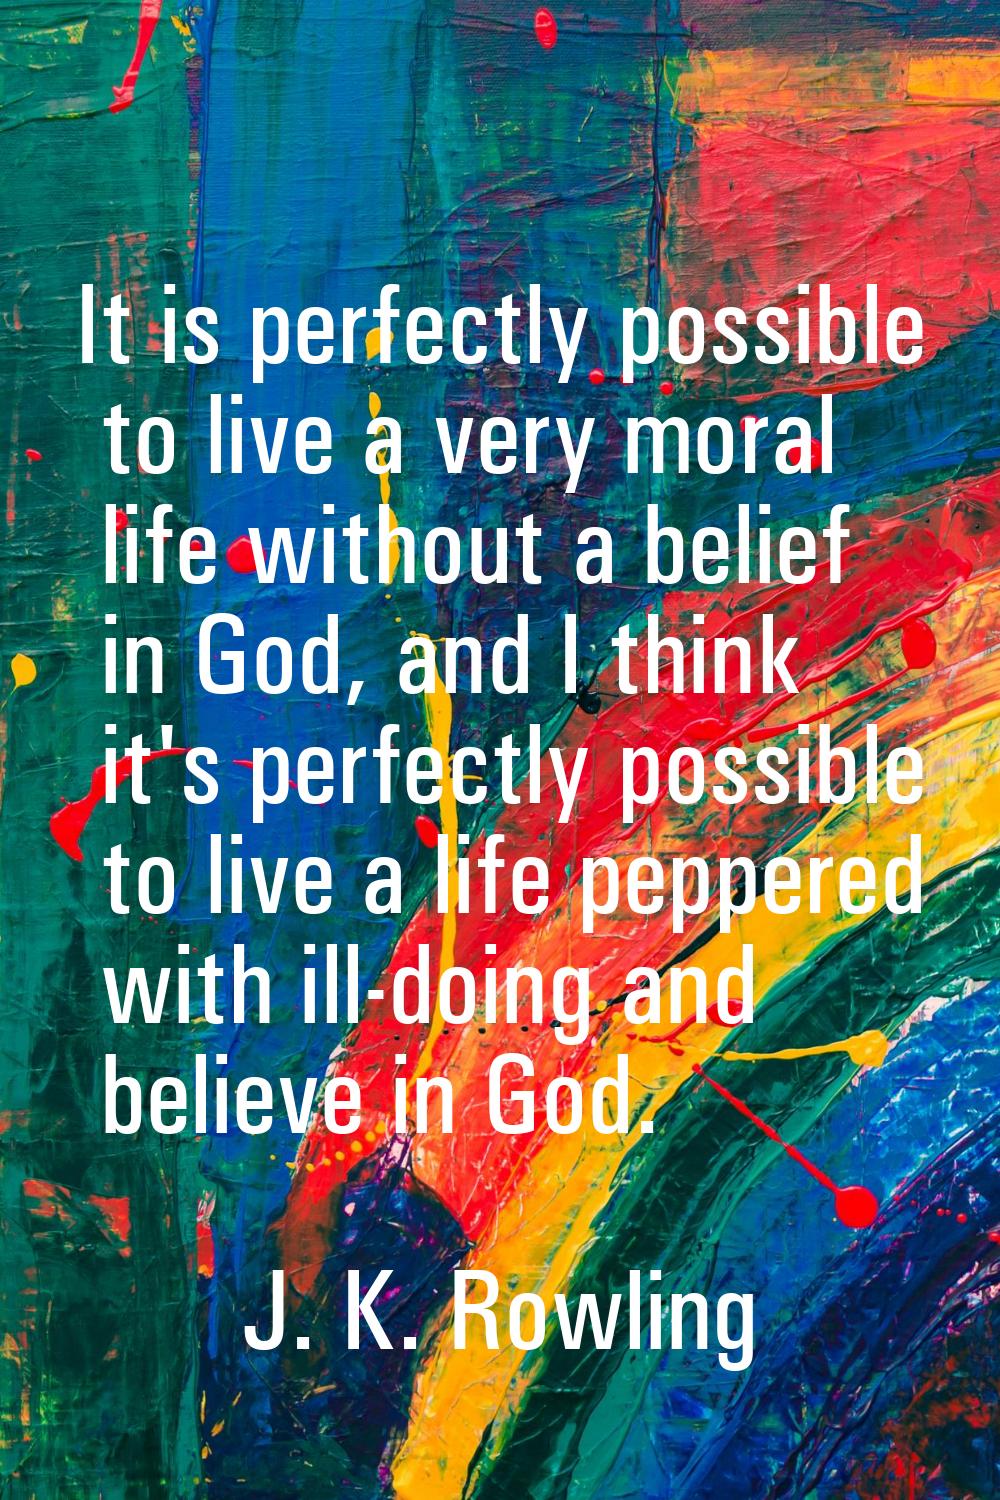 It is perfectly possible to live a very moral life without a belief in God, and I think it's perfec